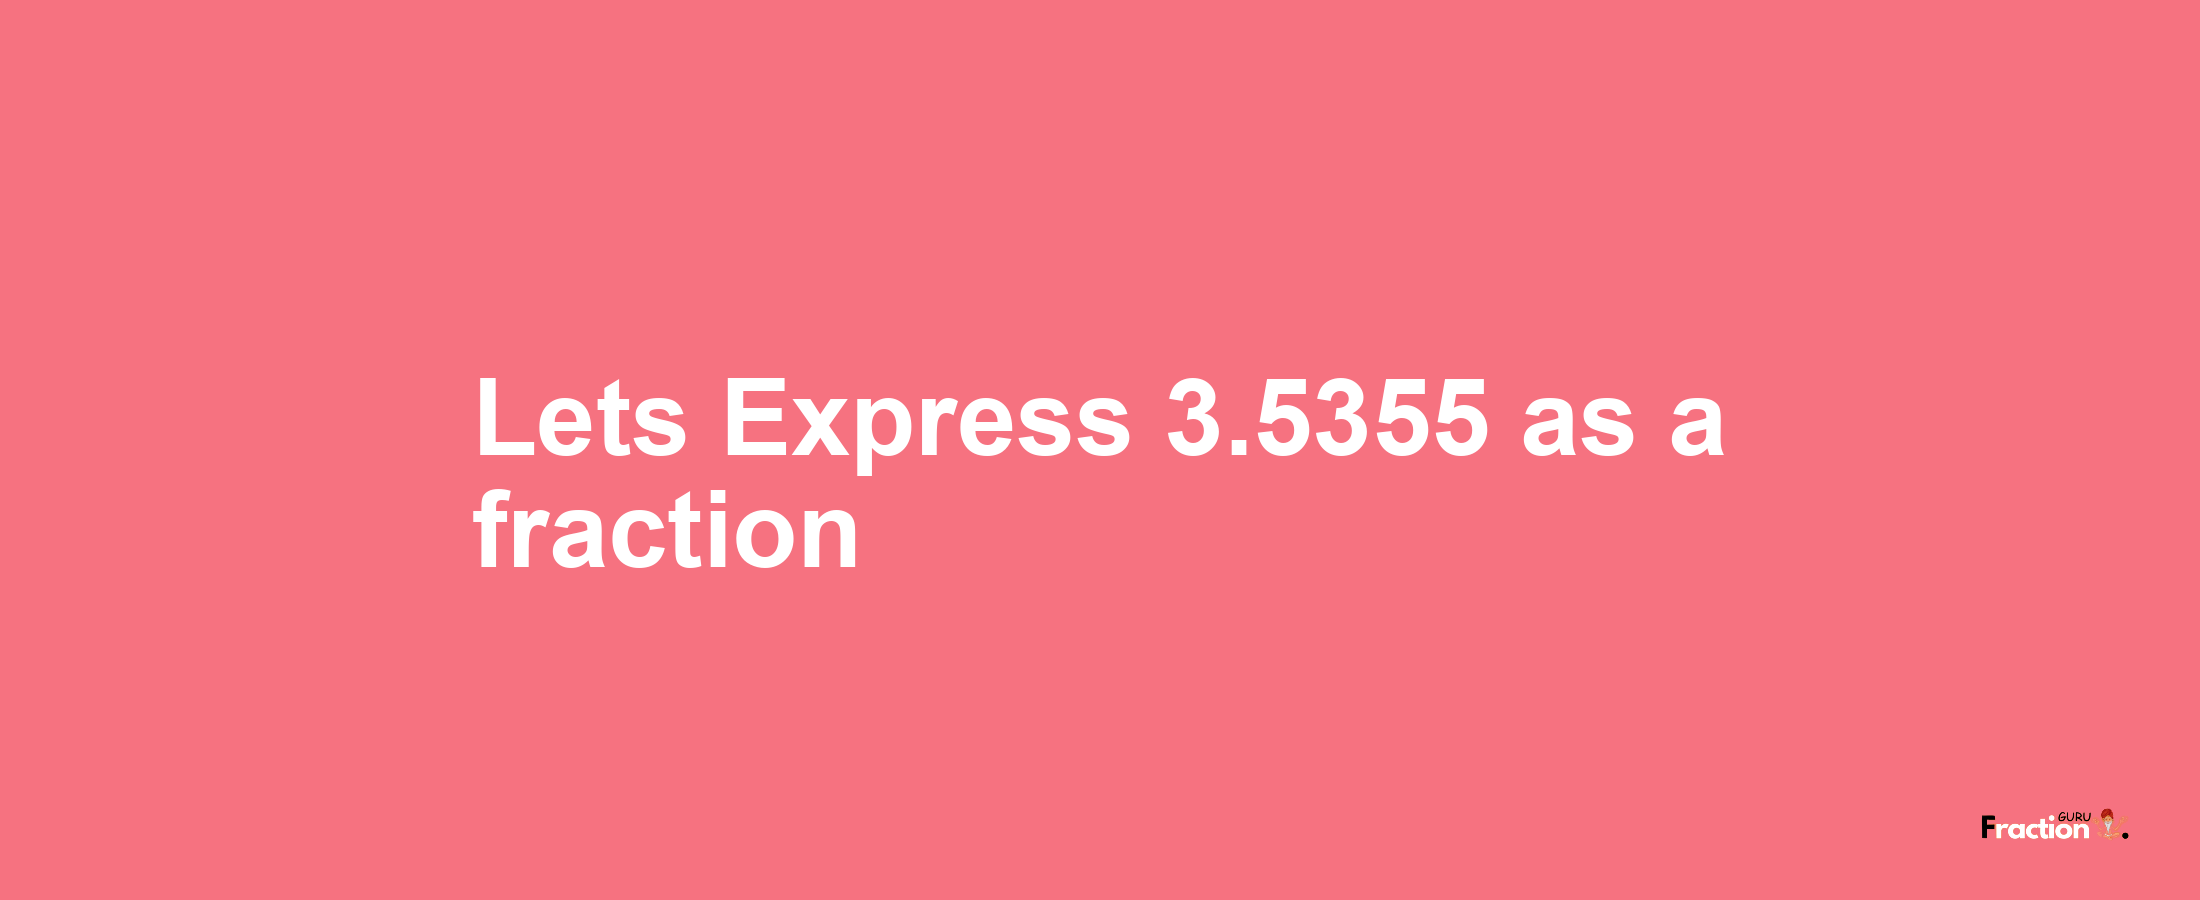 Lets Express 3.5355 as afraction